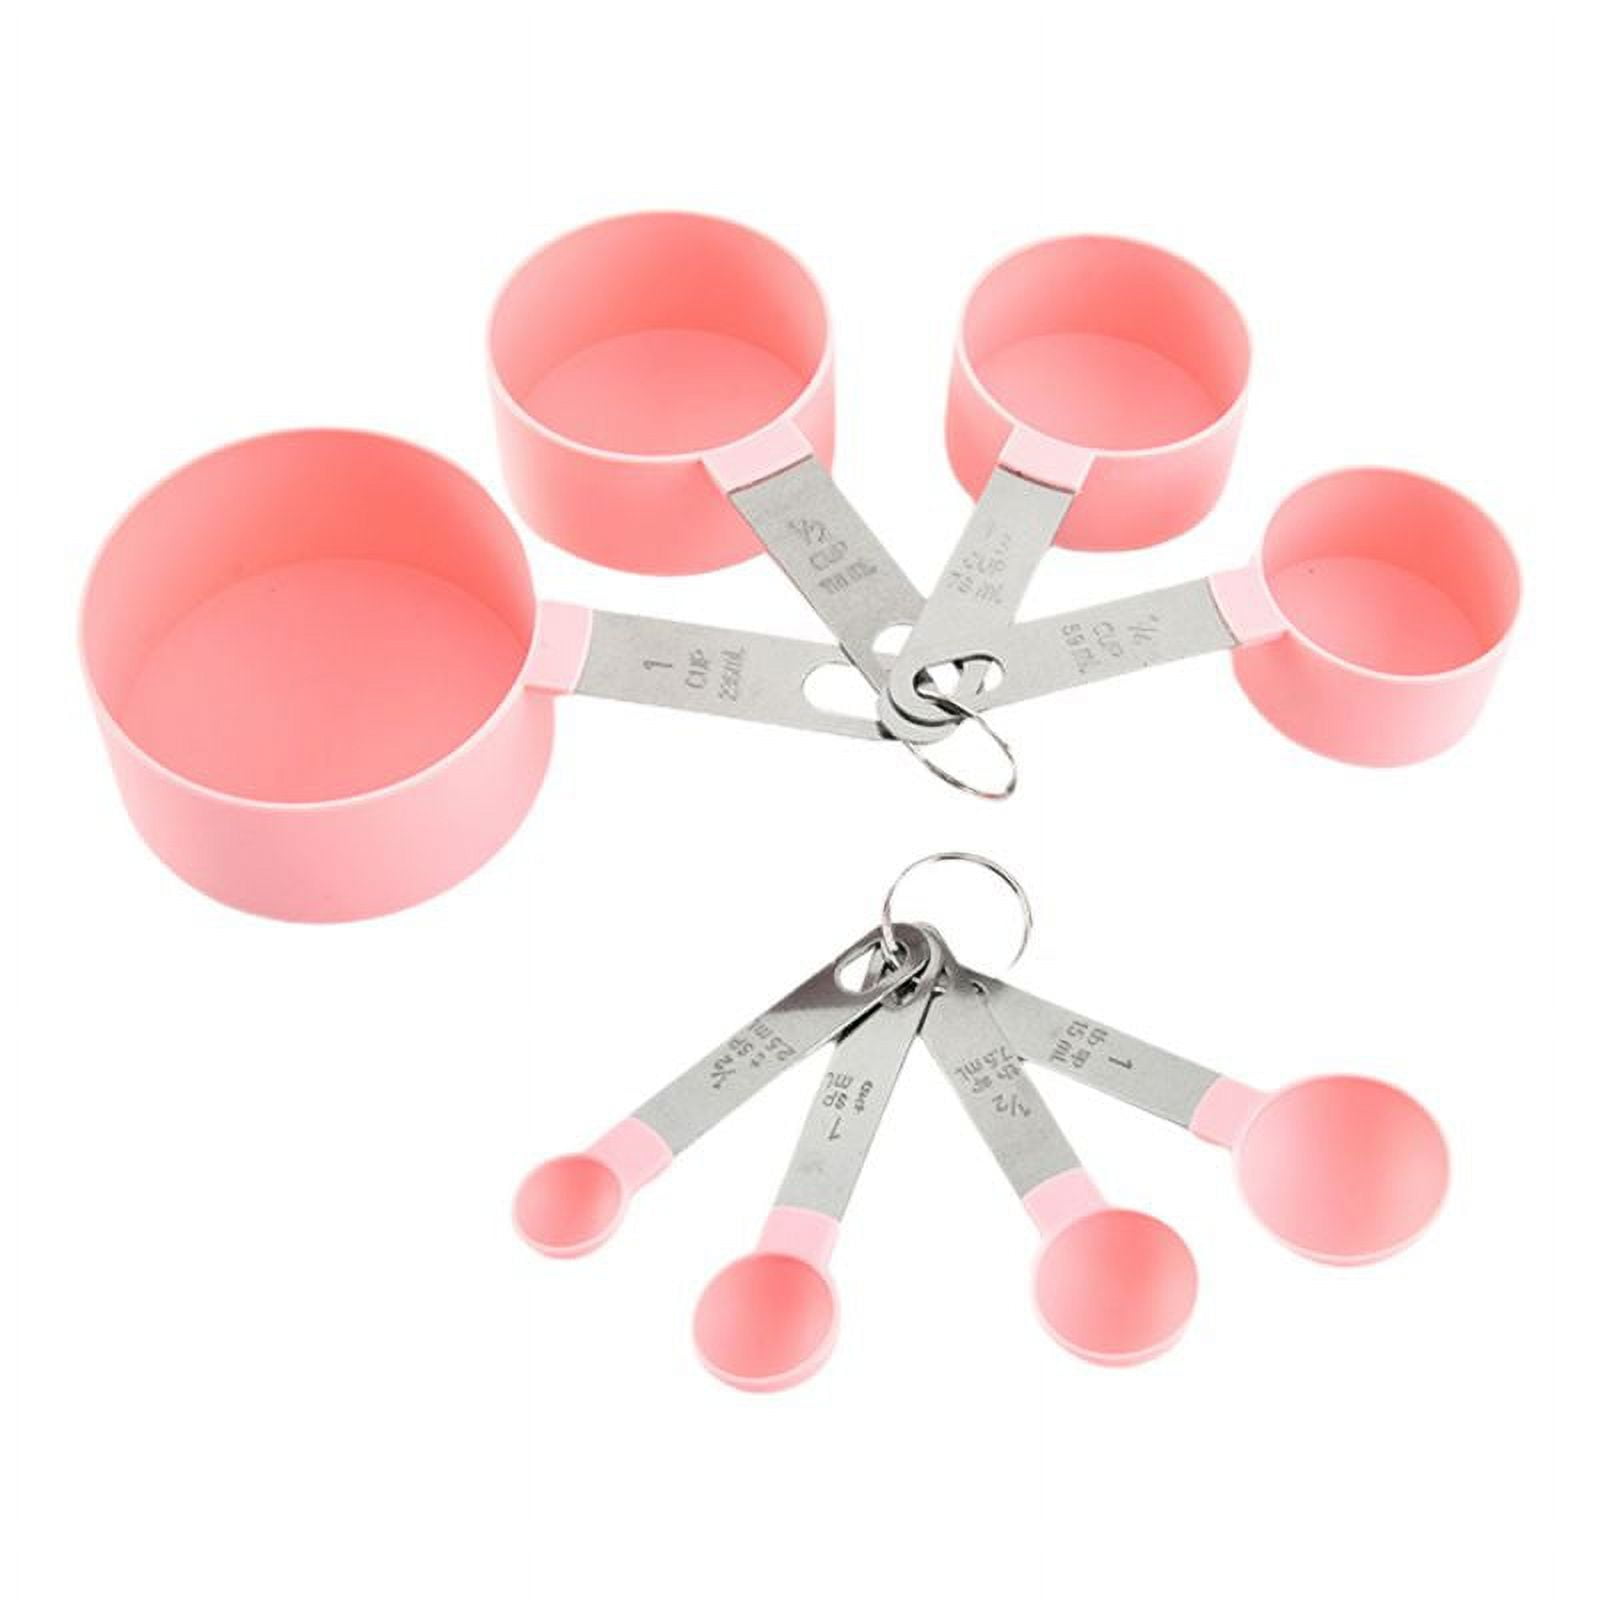 8 Pieces Measuring Cups And Spoons Set / Nesting Measuring Cups With  Stainless Steel Handle / For Dry And Liquid Ingredient (pink)